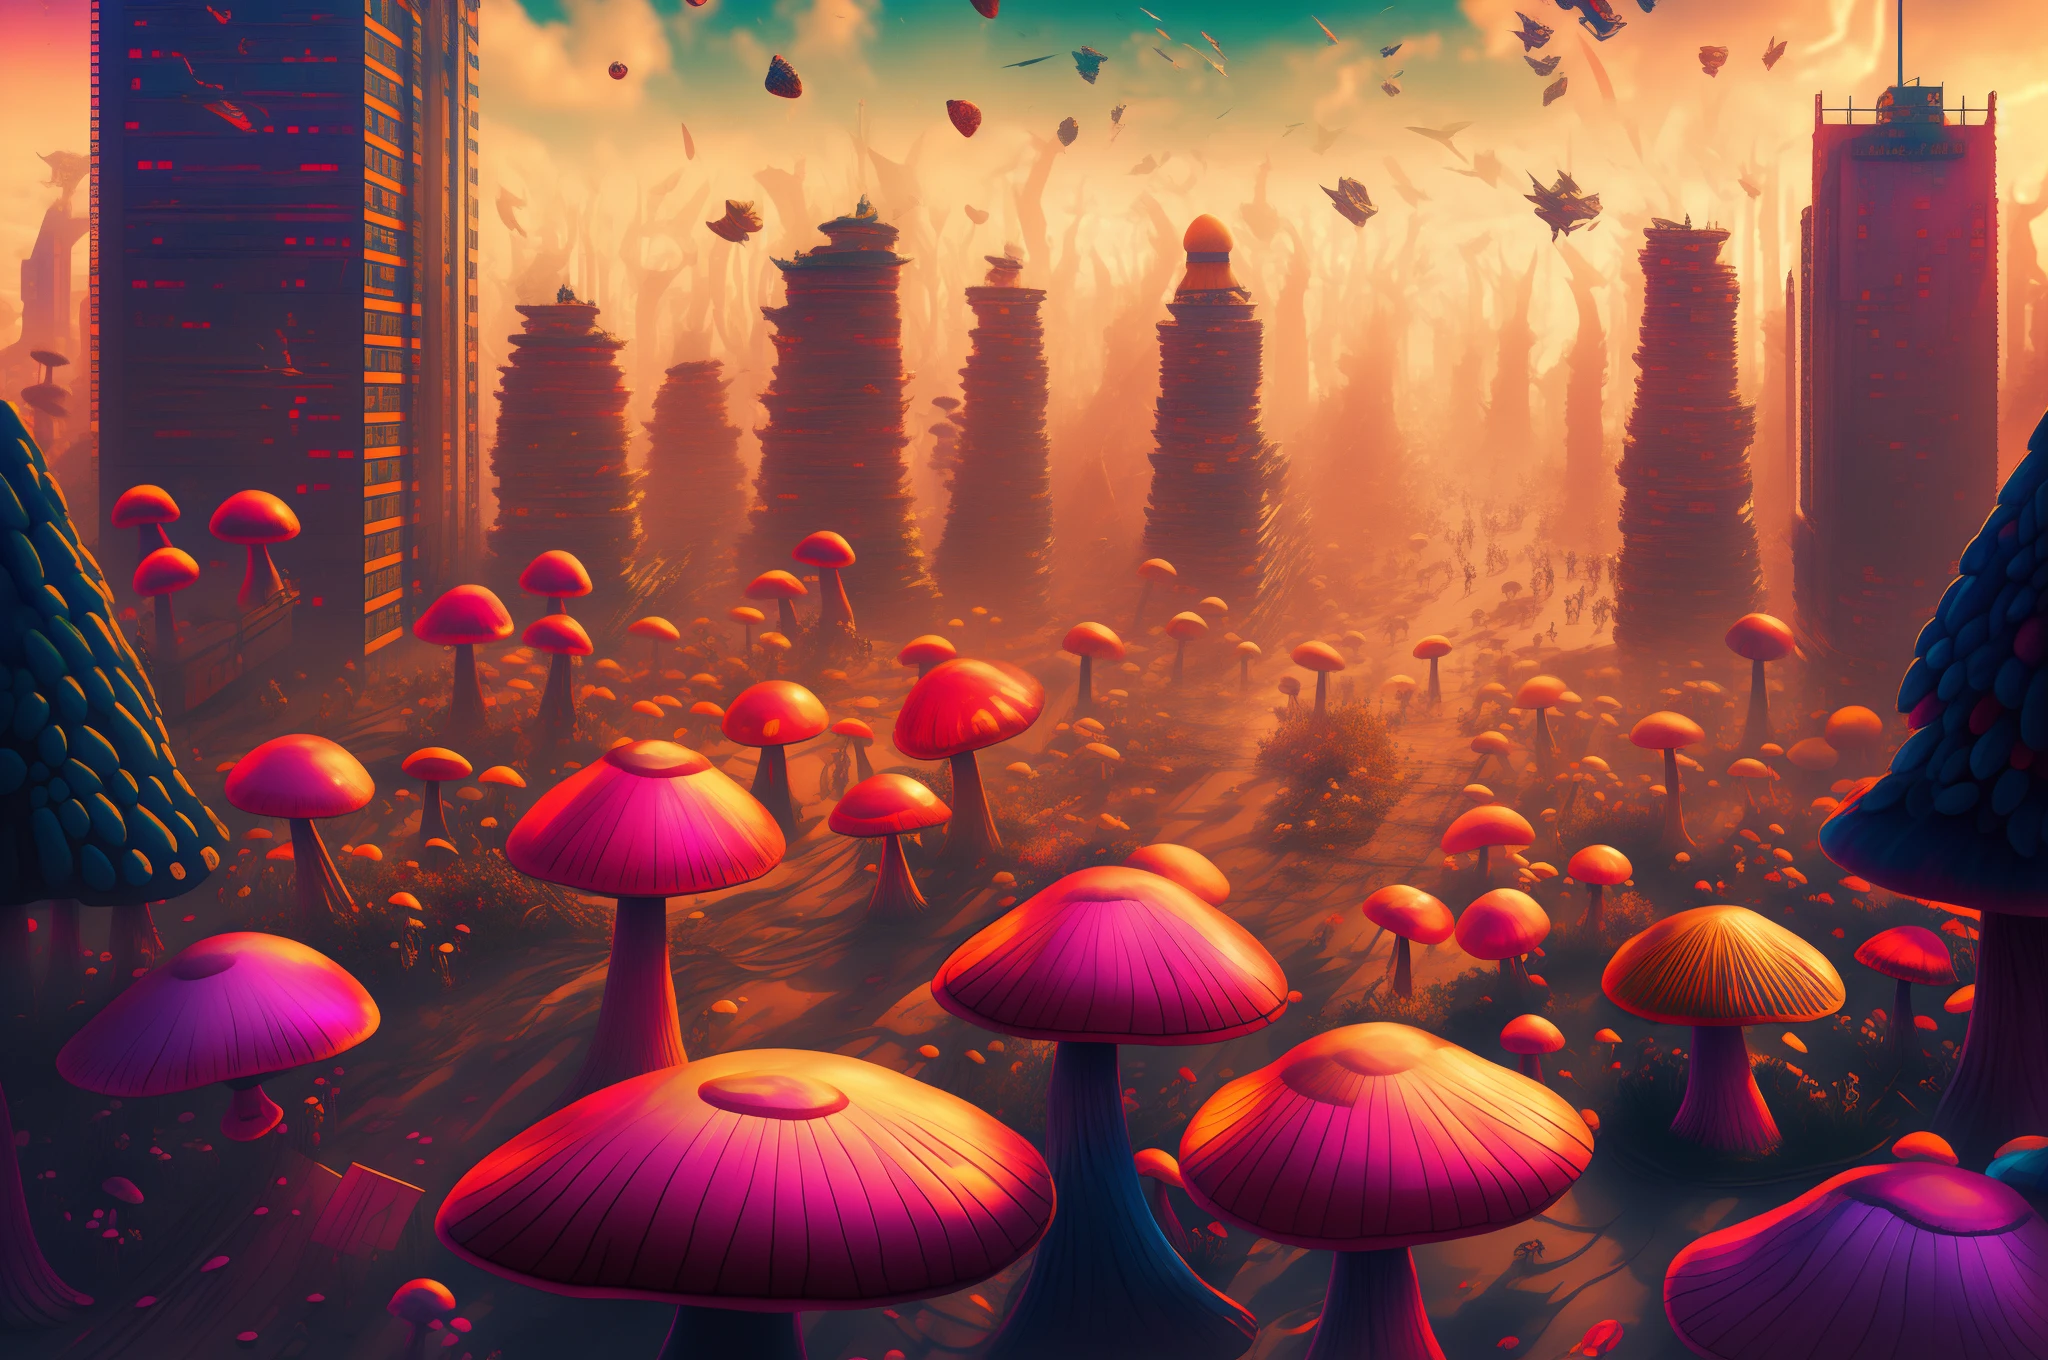 army of colorful mushrooms, invade a city, hallucination, reticle, dreamlikeart